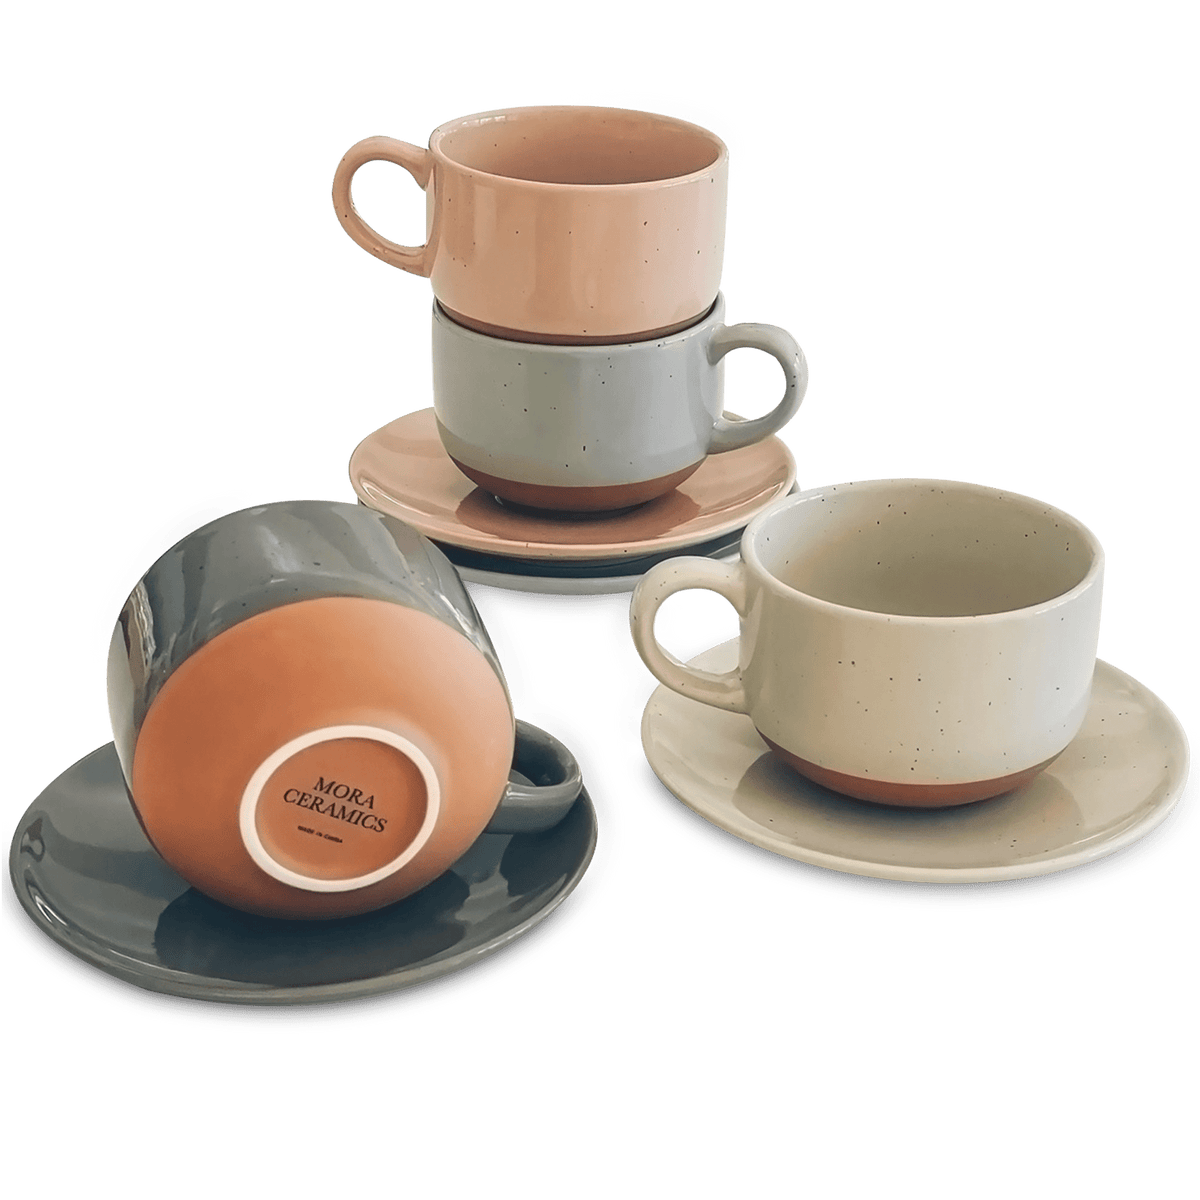 Cappuccino Mugs with Saucers Set of 4 - 8oz - Assorted Neutrals